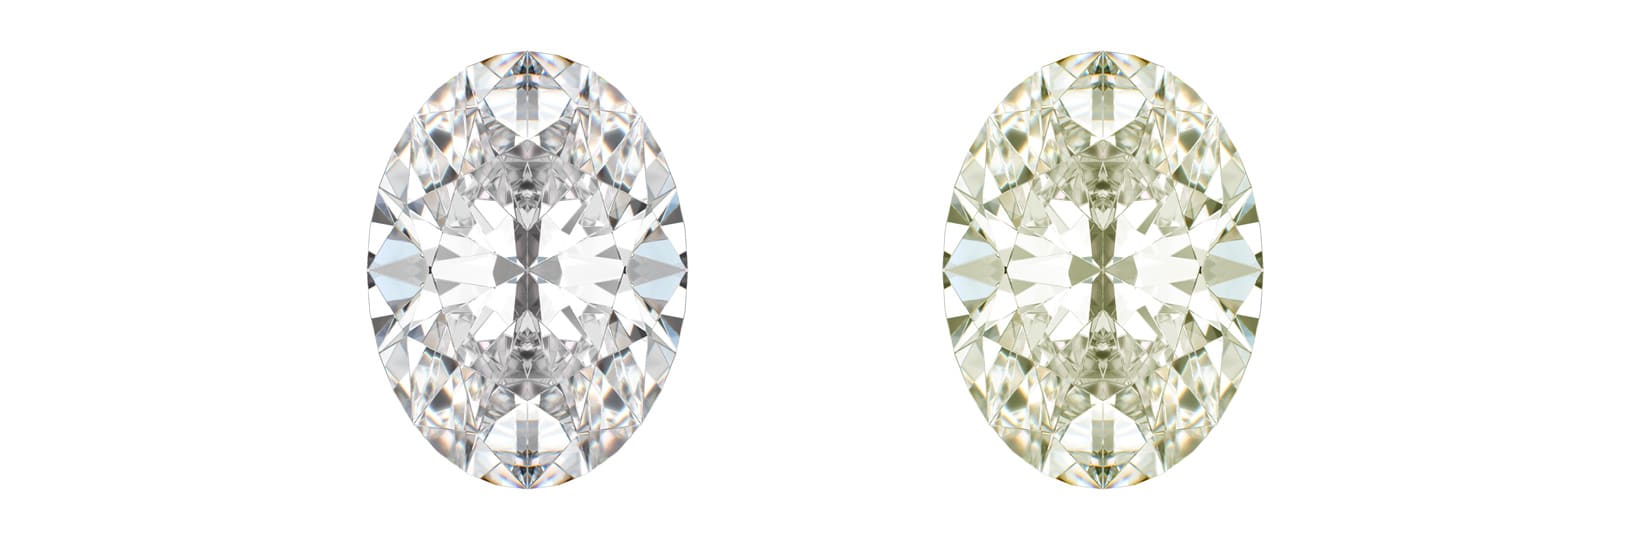 Two oval cut diamonds compared side by side